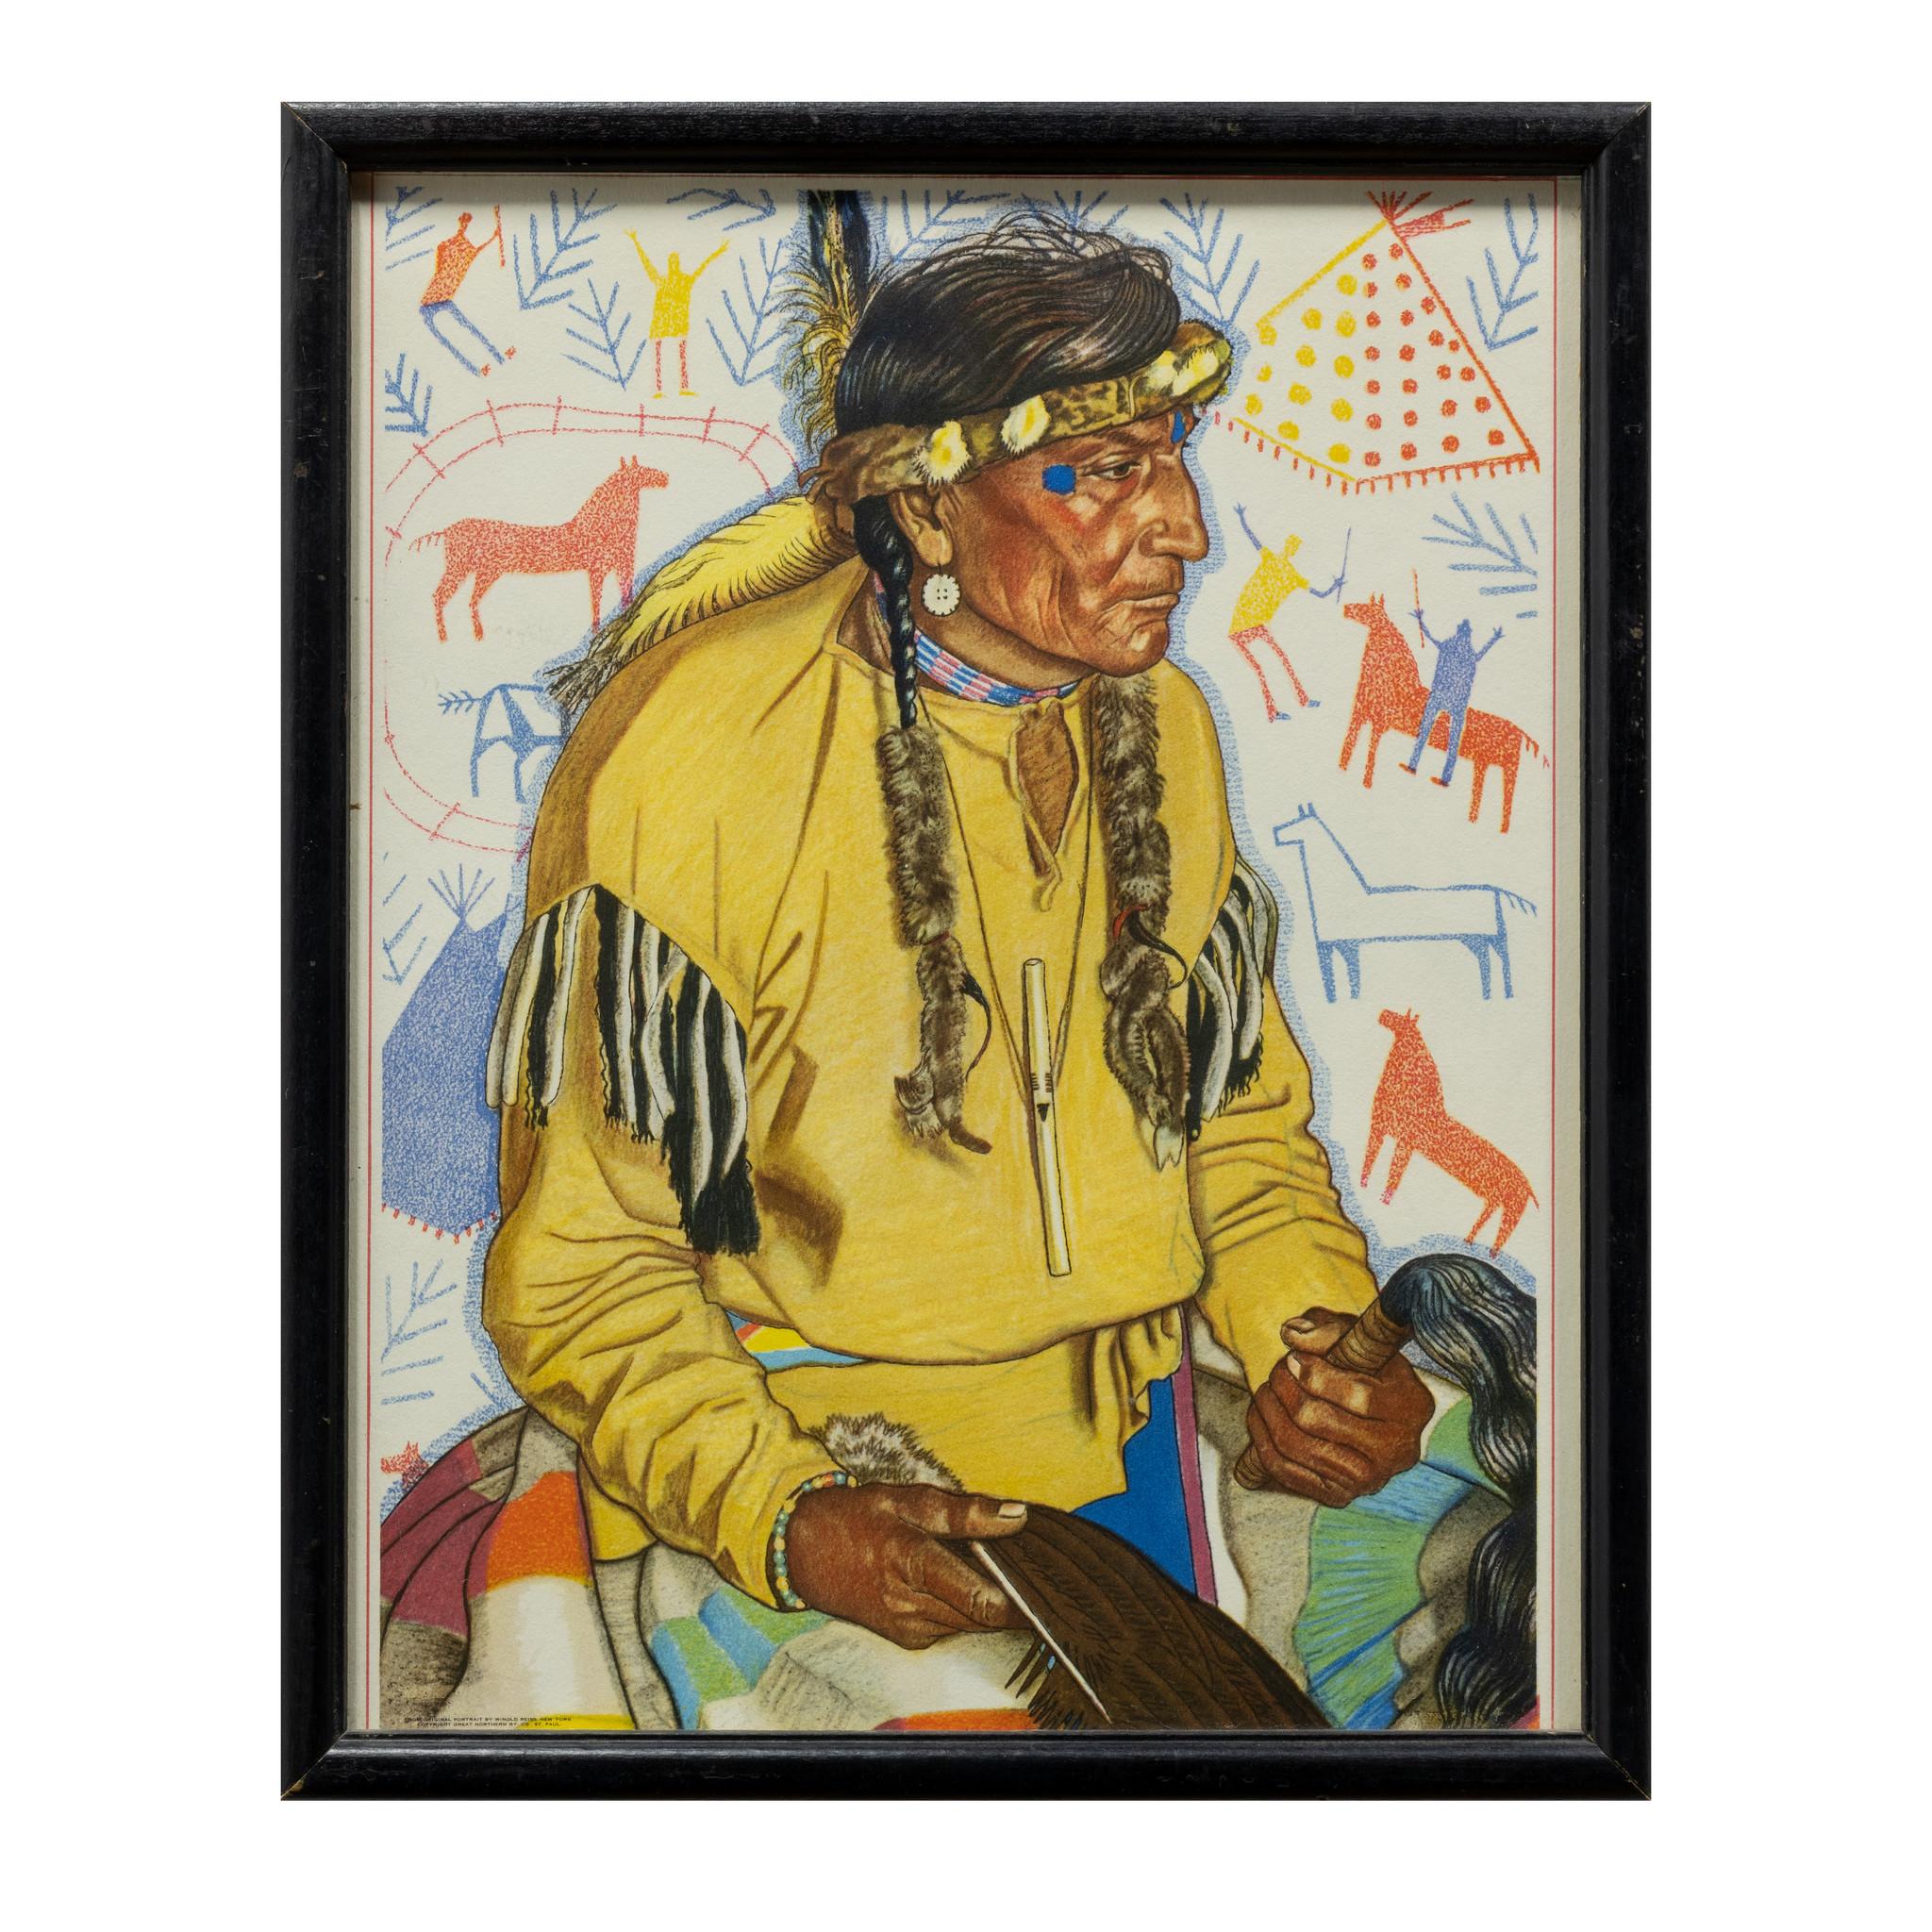 Blackfeet Indians Prints by Weinhold Reis In Excellent Condition For Sale In Coeur d'Alene, ID